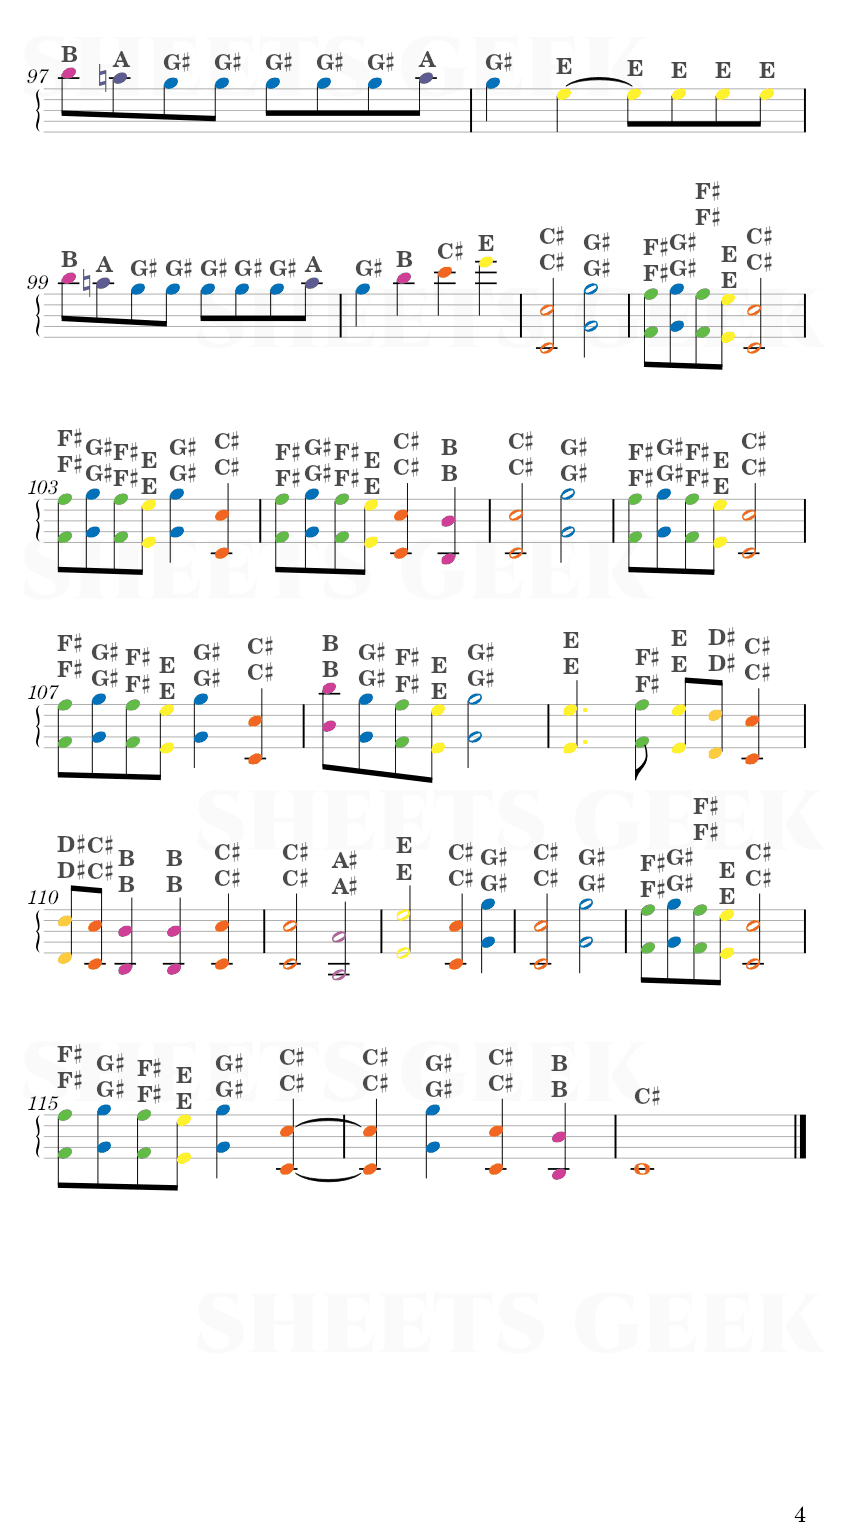 Mixed Up - ENHYPEN Easy Sheets Music Free for piano, keyboard, flute, violin, sax, celllo 4